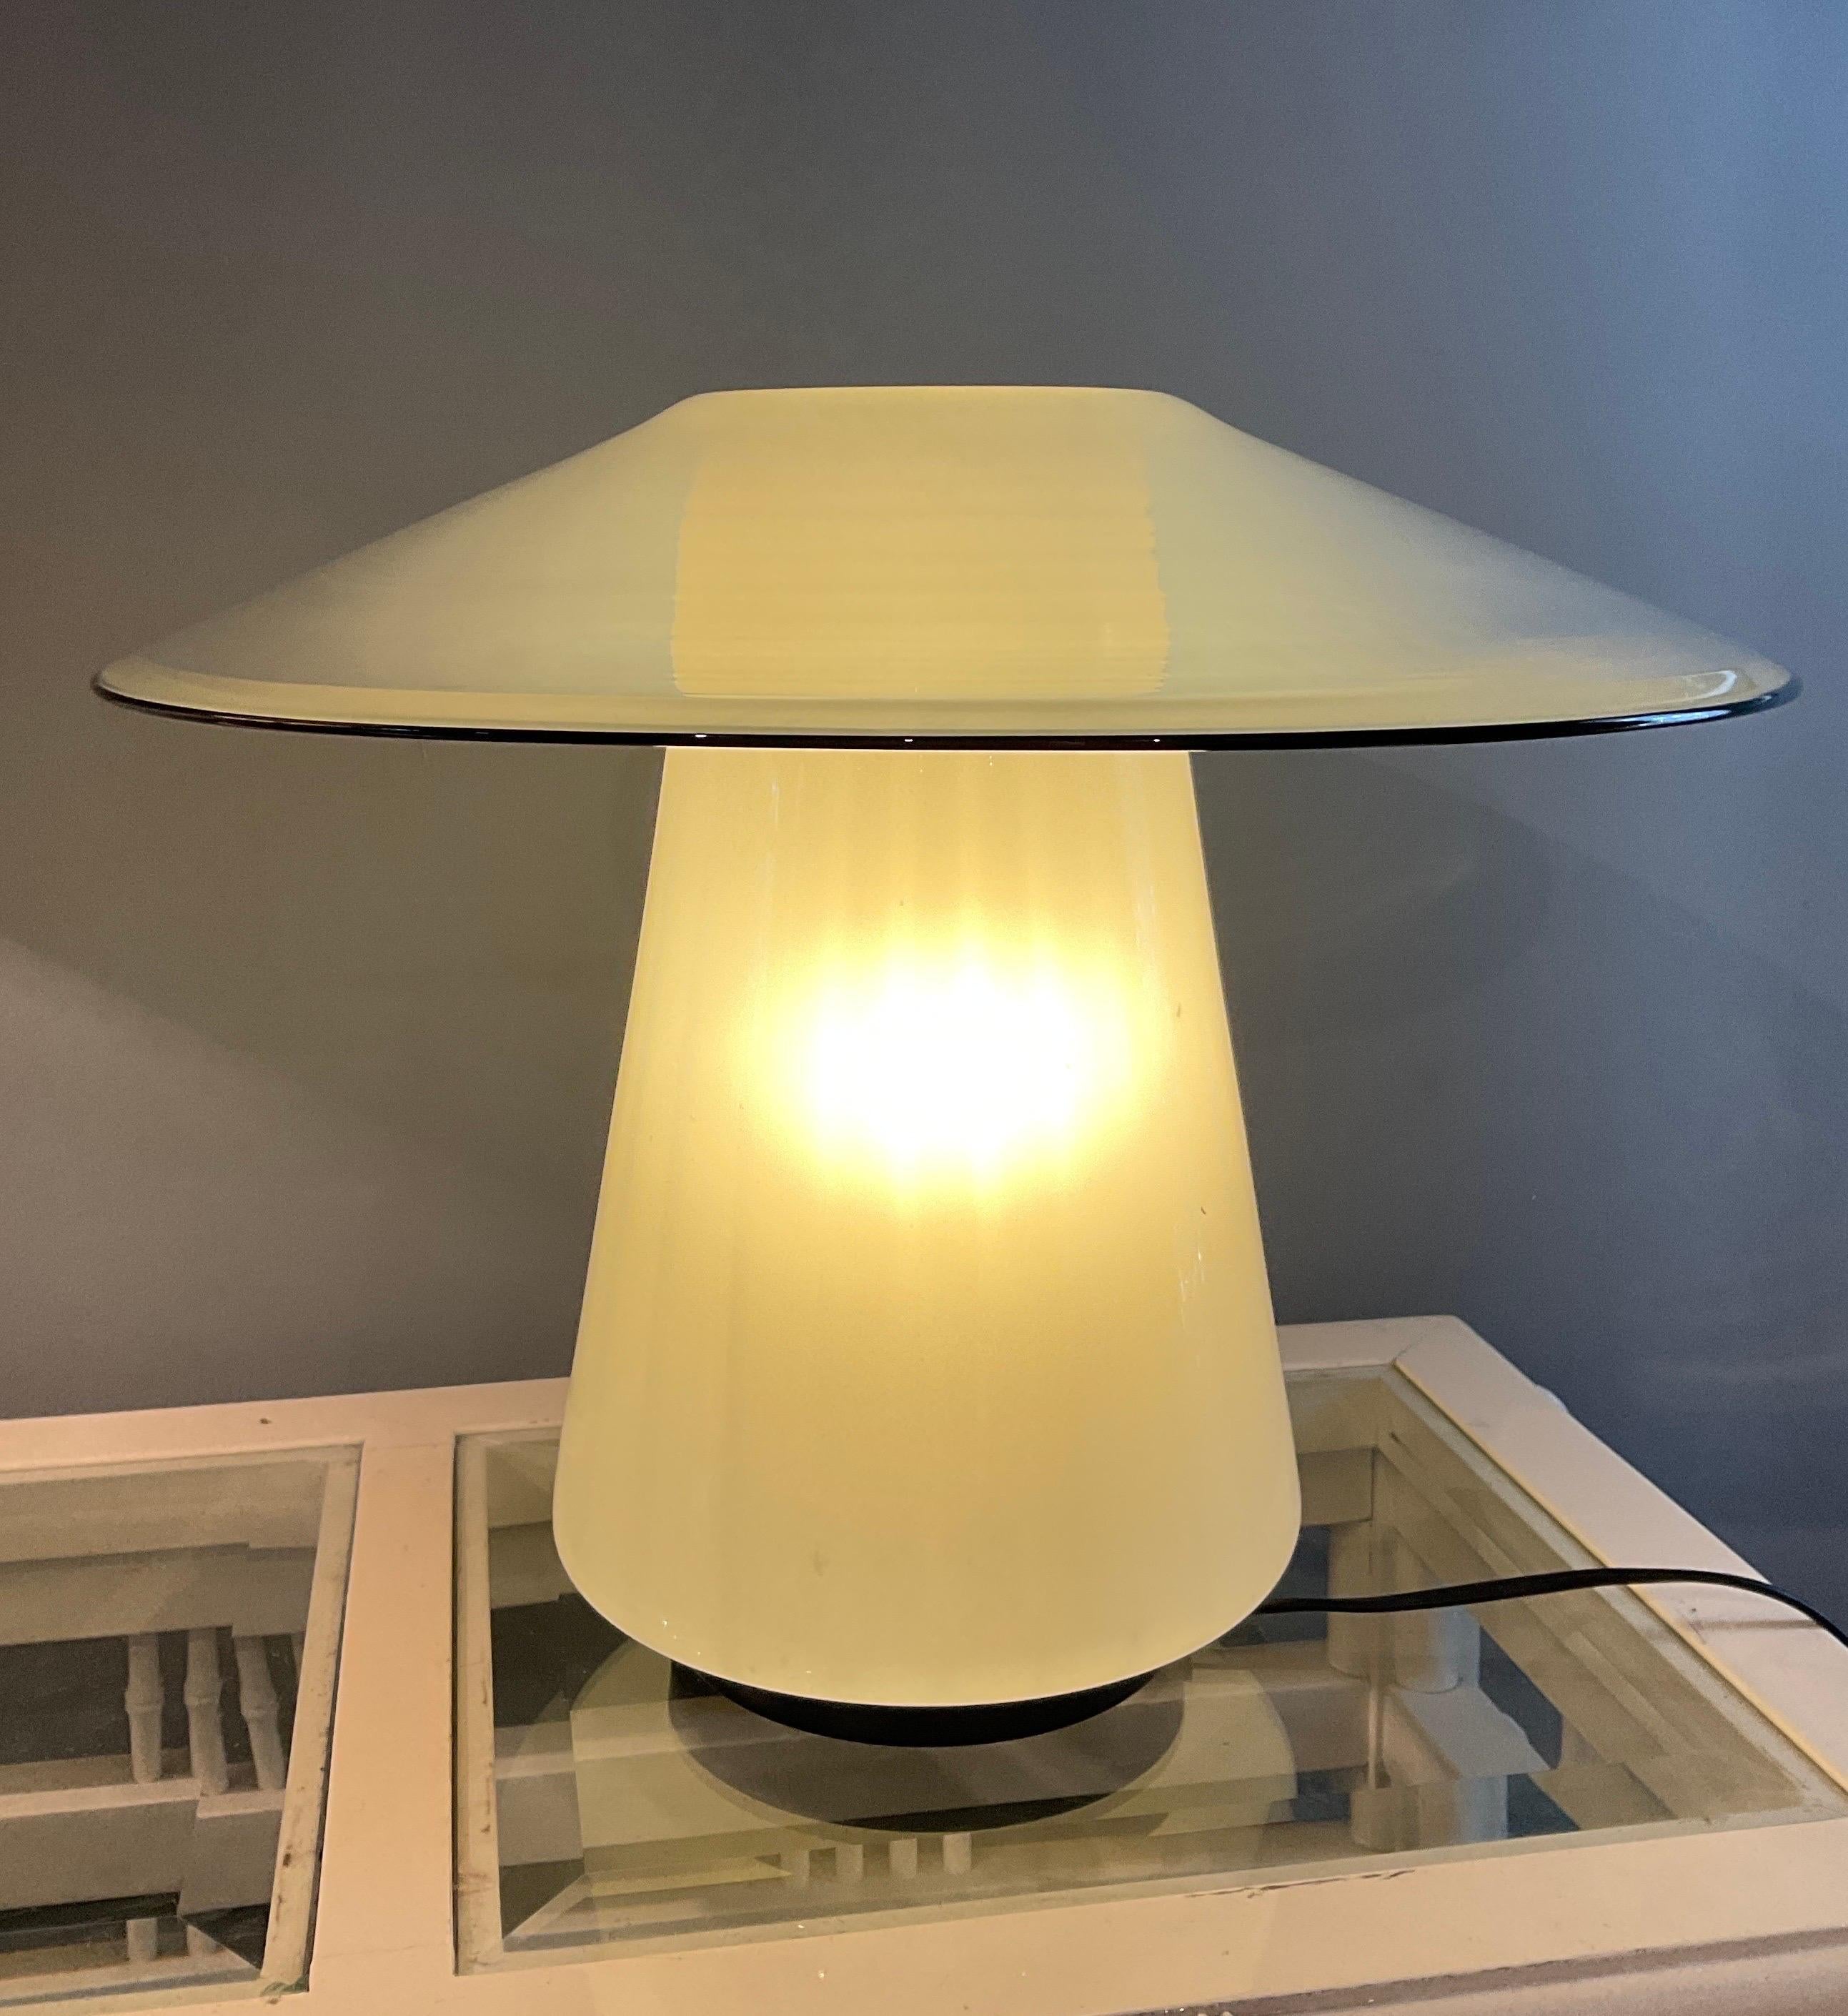 Vintage table lamp made of Murano glass 1970 in good condition with small wear caused by years and use. Please view the attached images carefully.